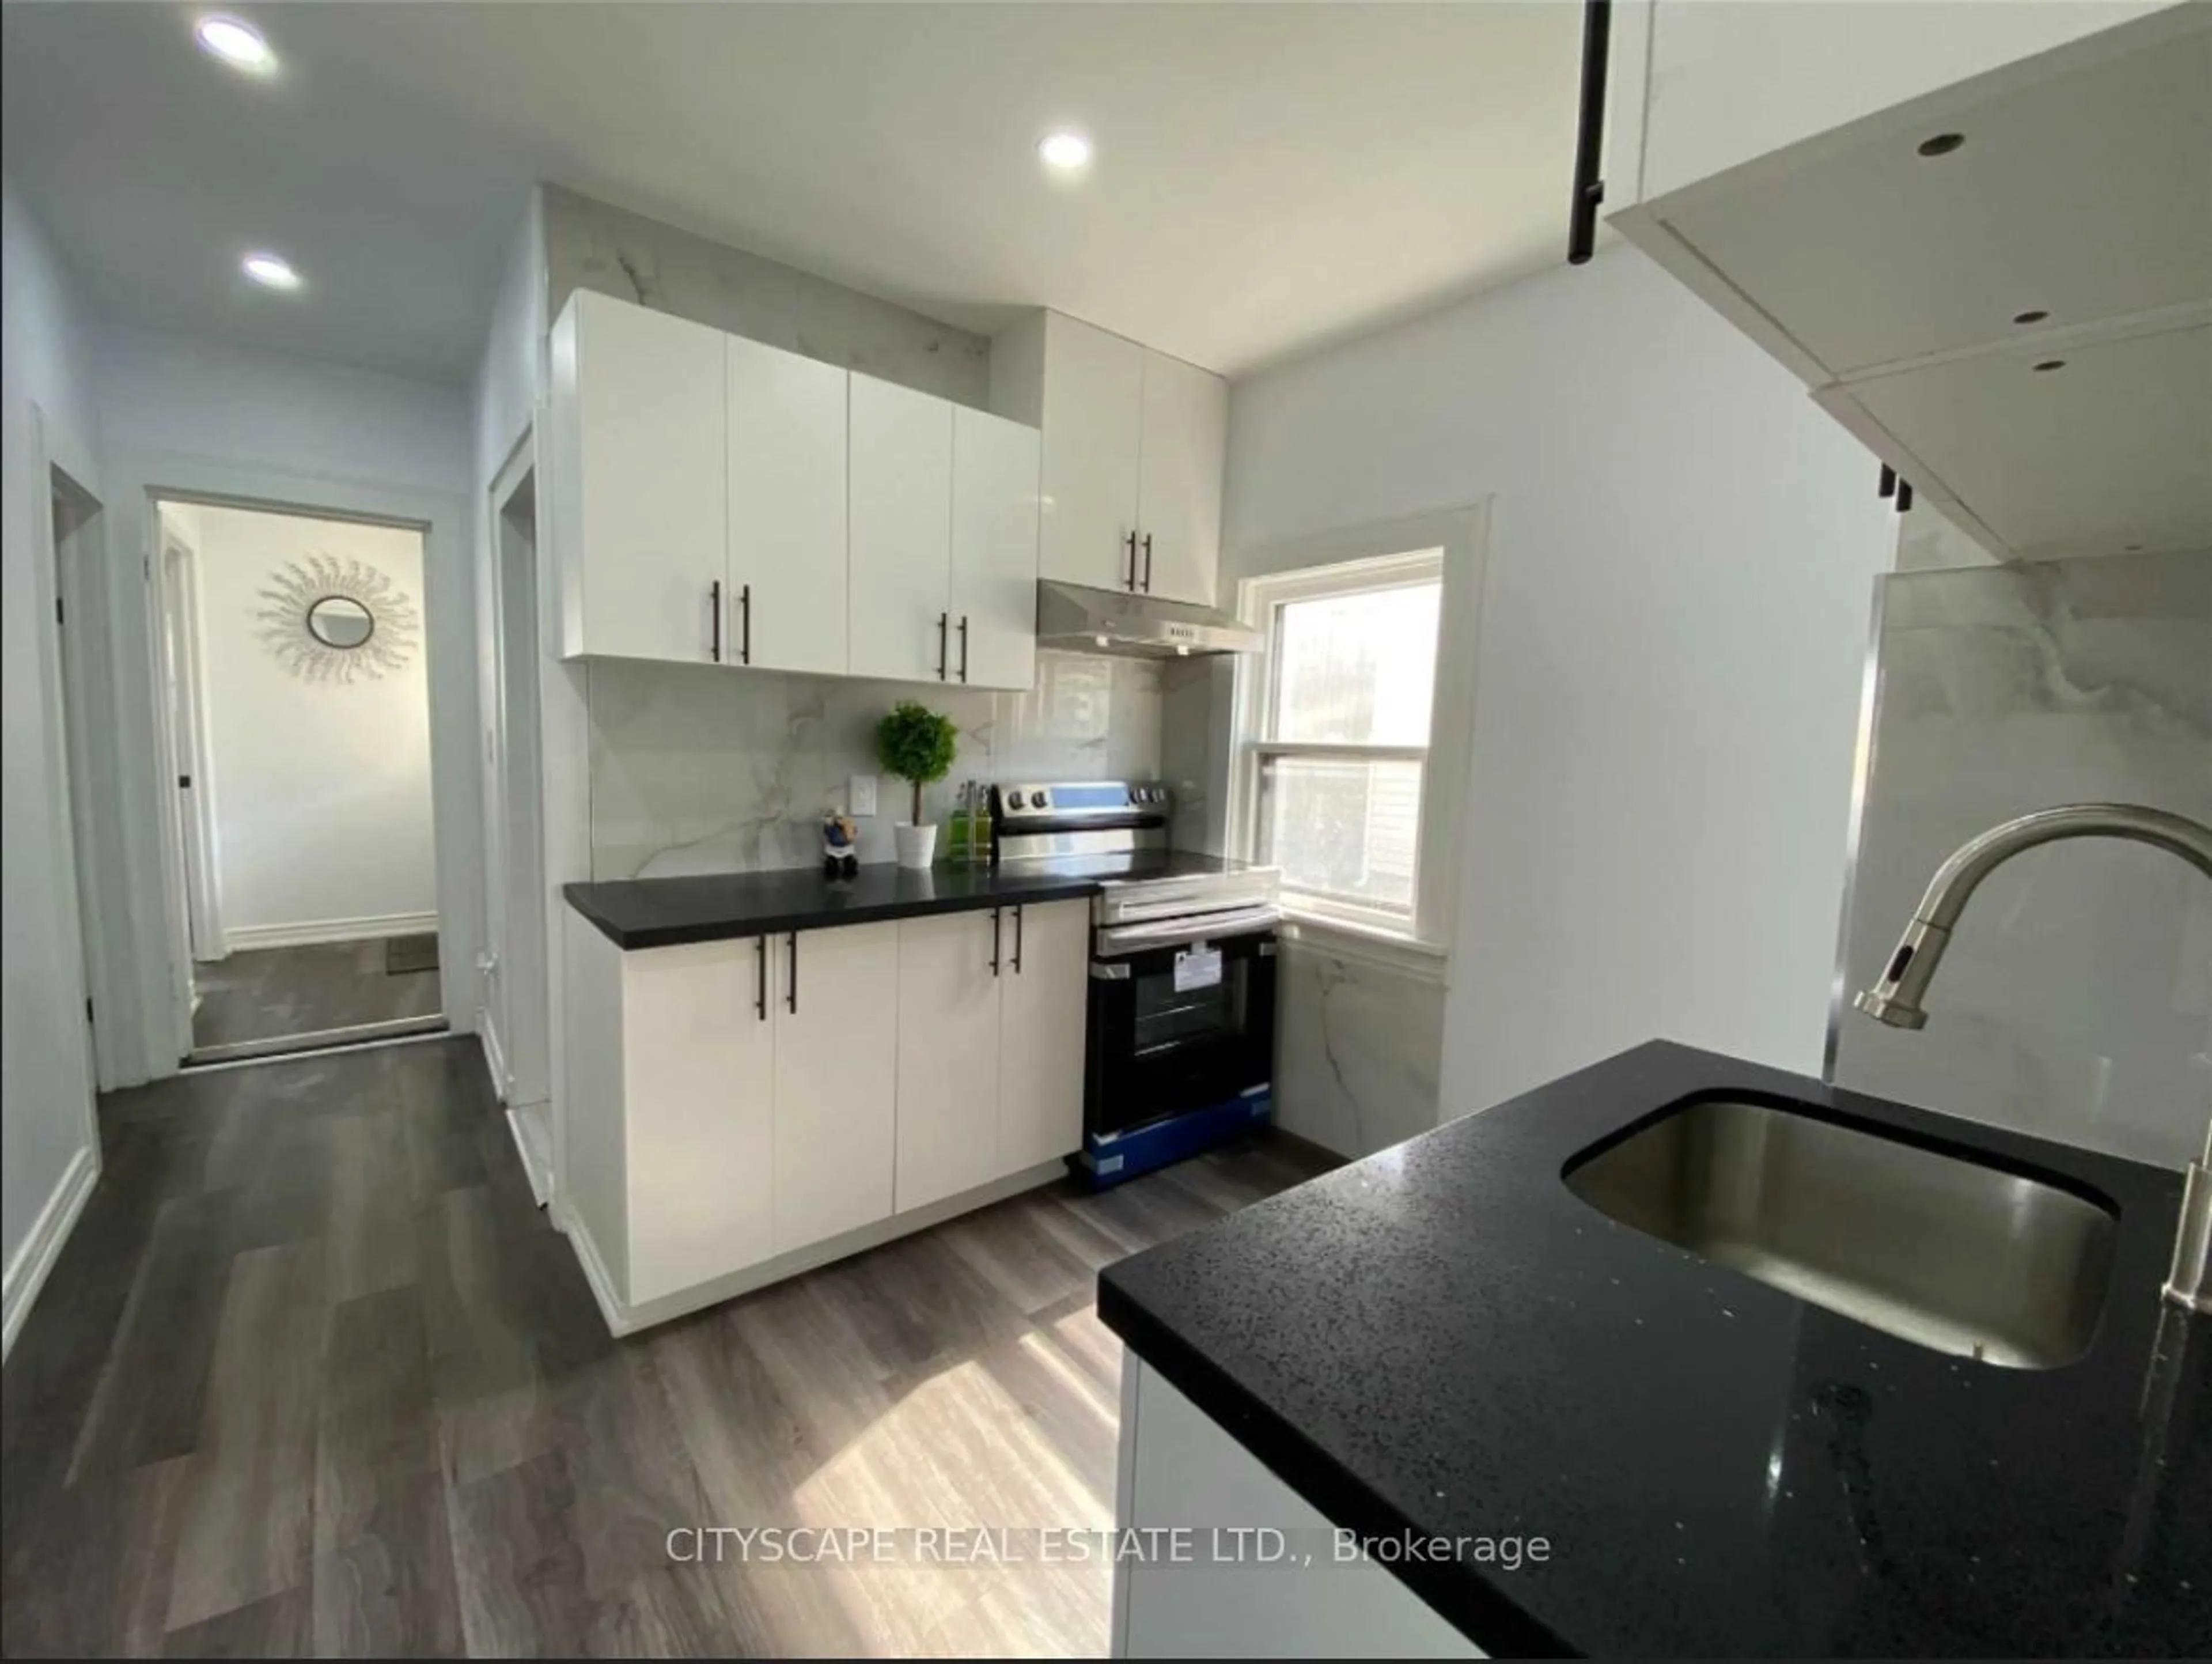 Contemporary kitchen for 223 Bloor St, Oshawa Ontario L1H 3M3